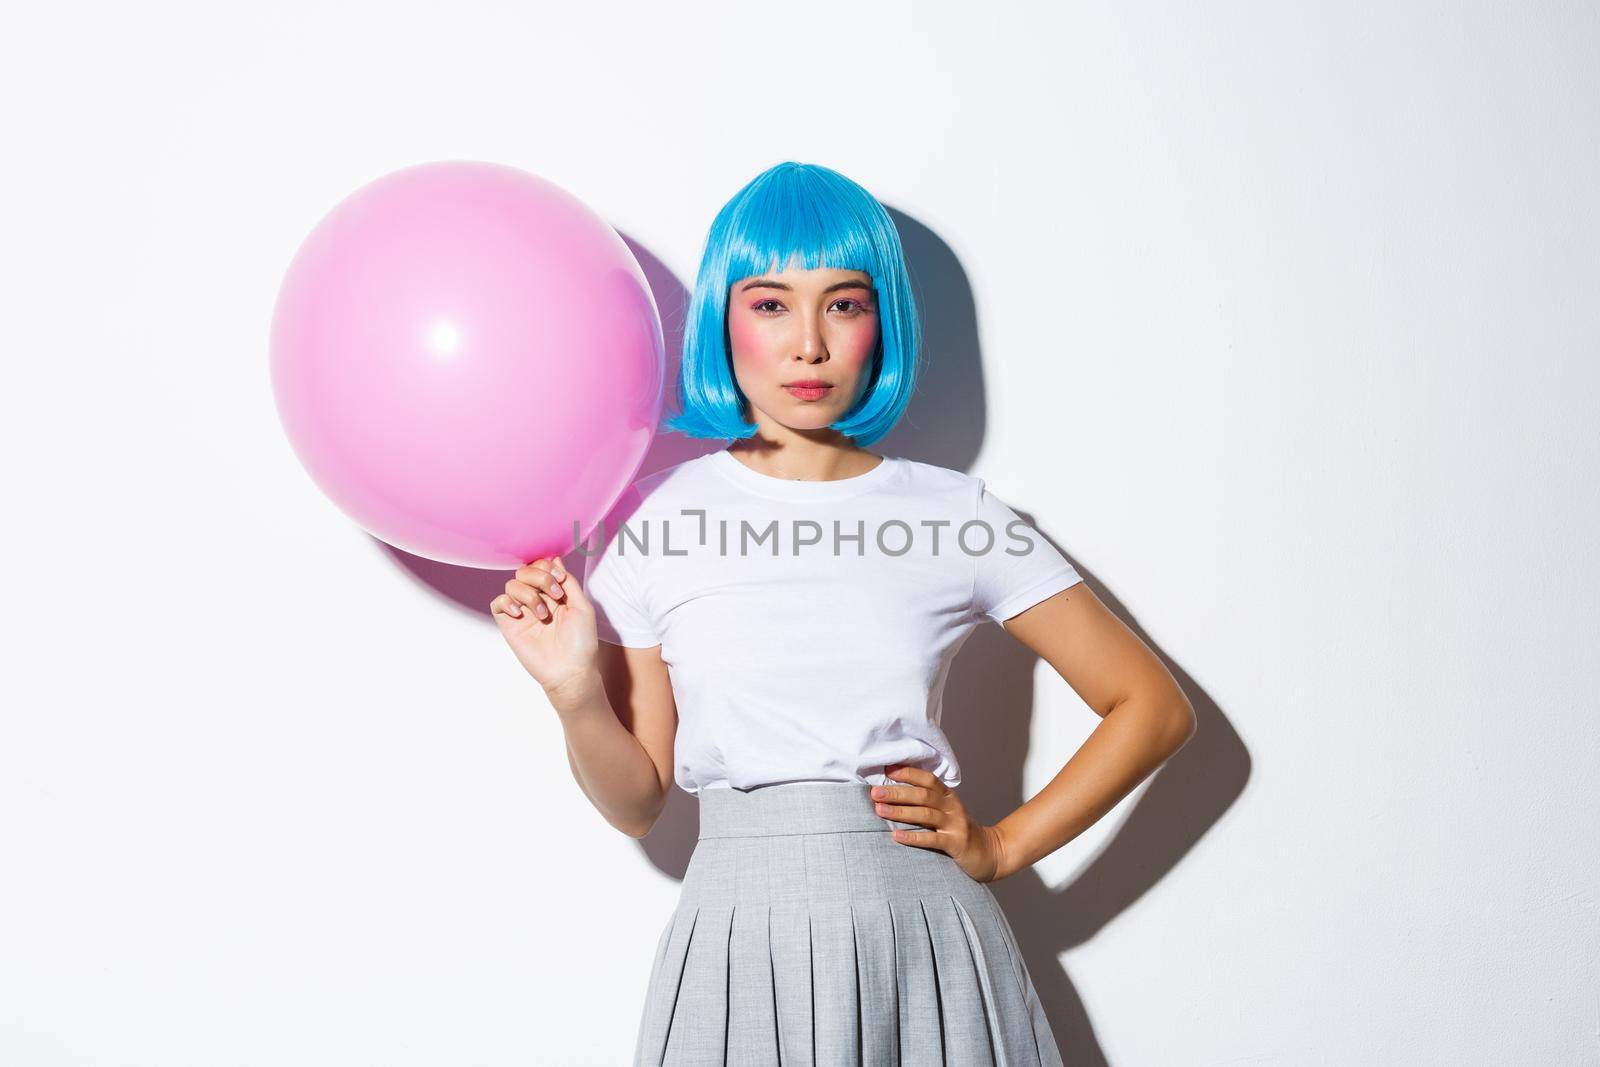 Image of sassy asian woman in blue wig, looking determined, holding pink balloon, standing over white background.